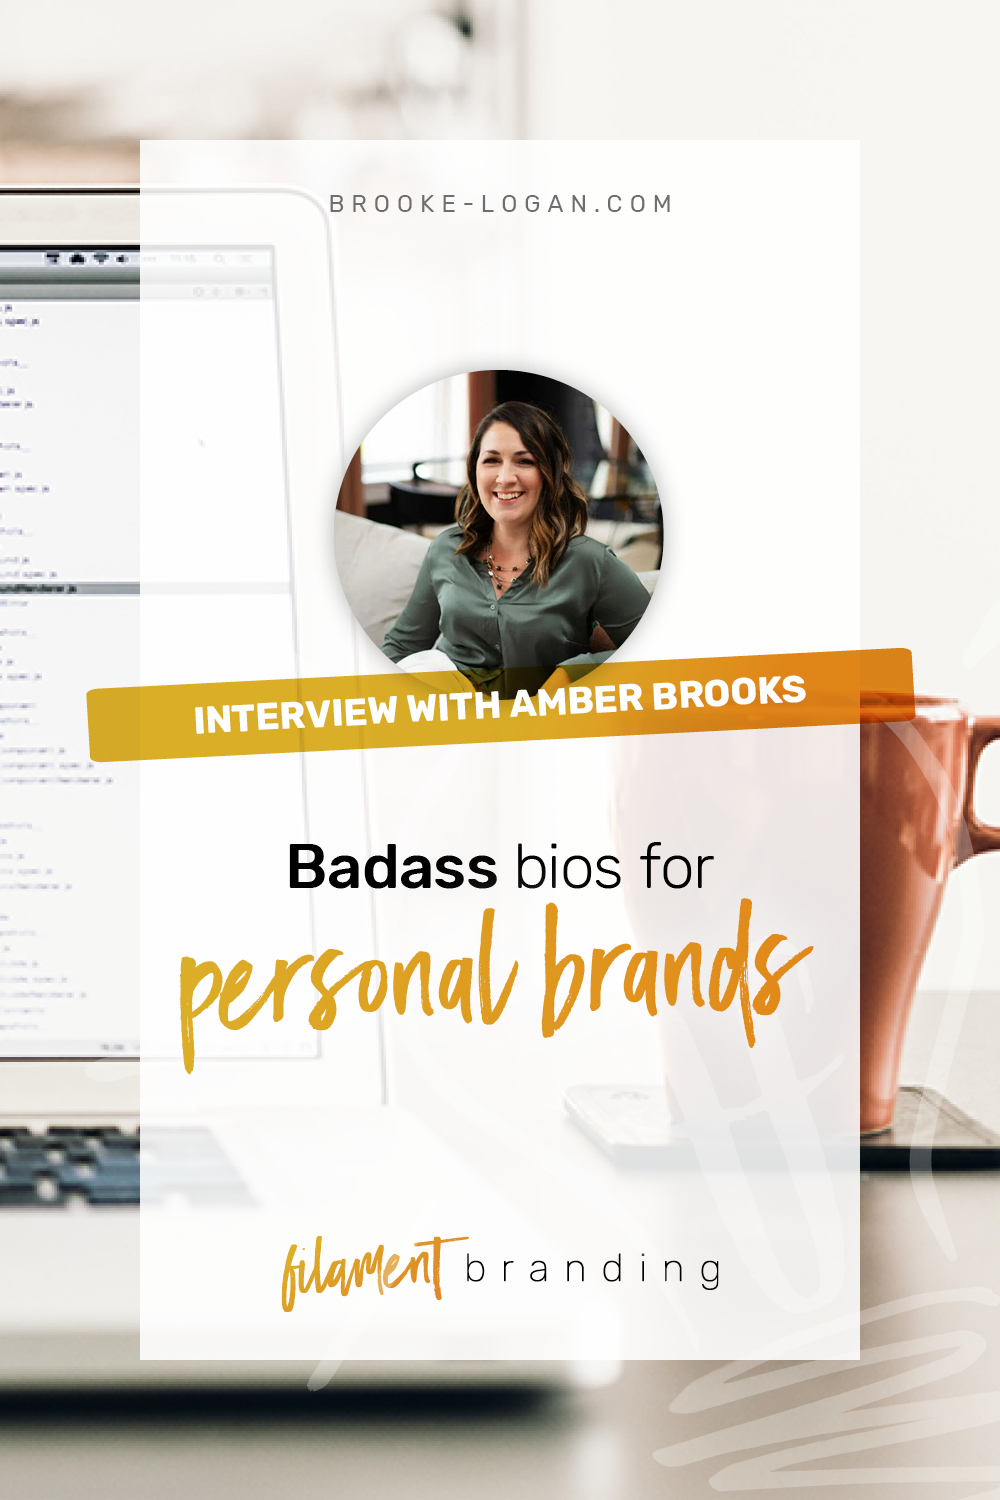 Ep 11: Badass bios for personal brands with Amber Brooks